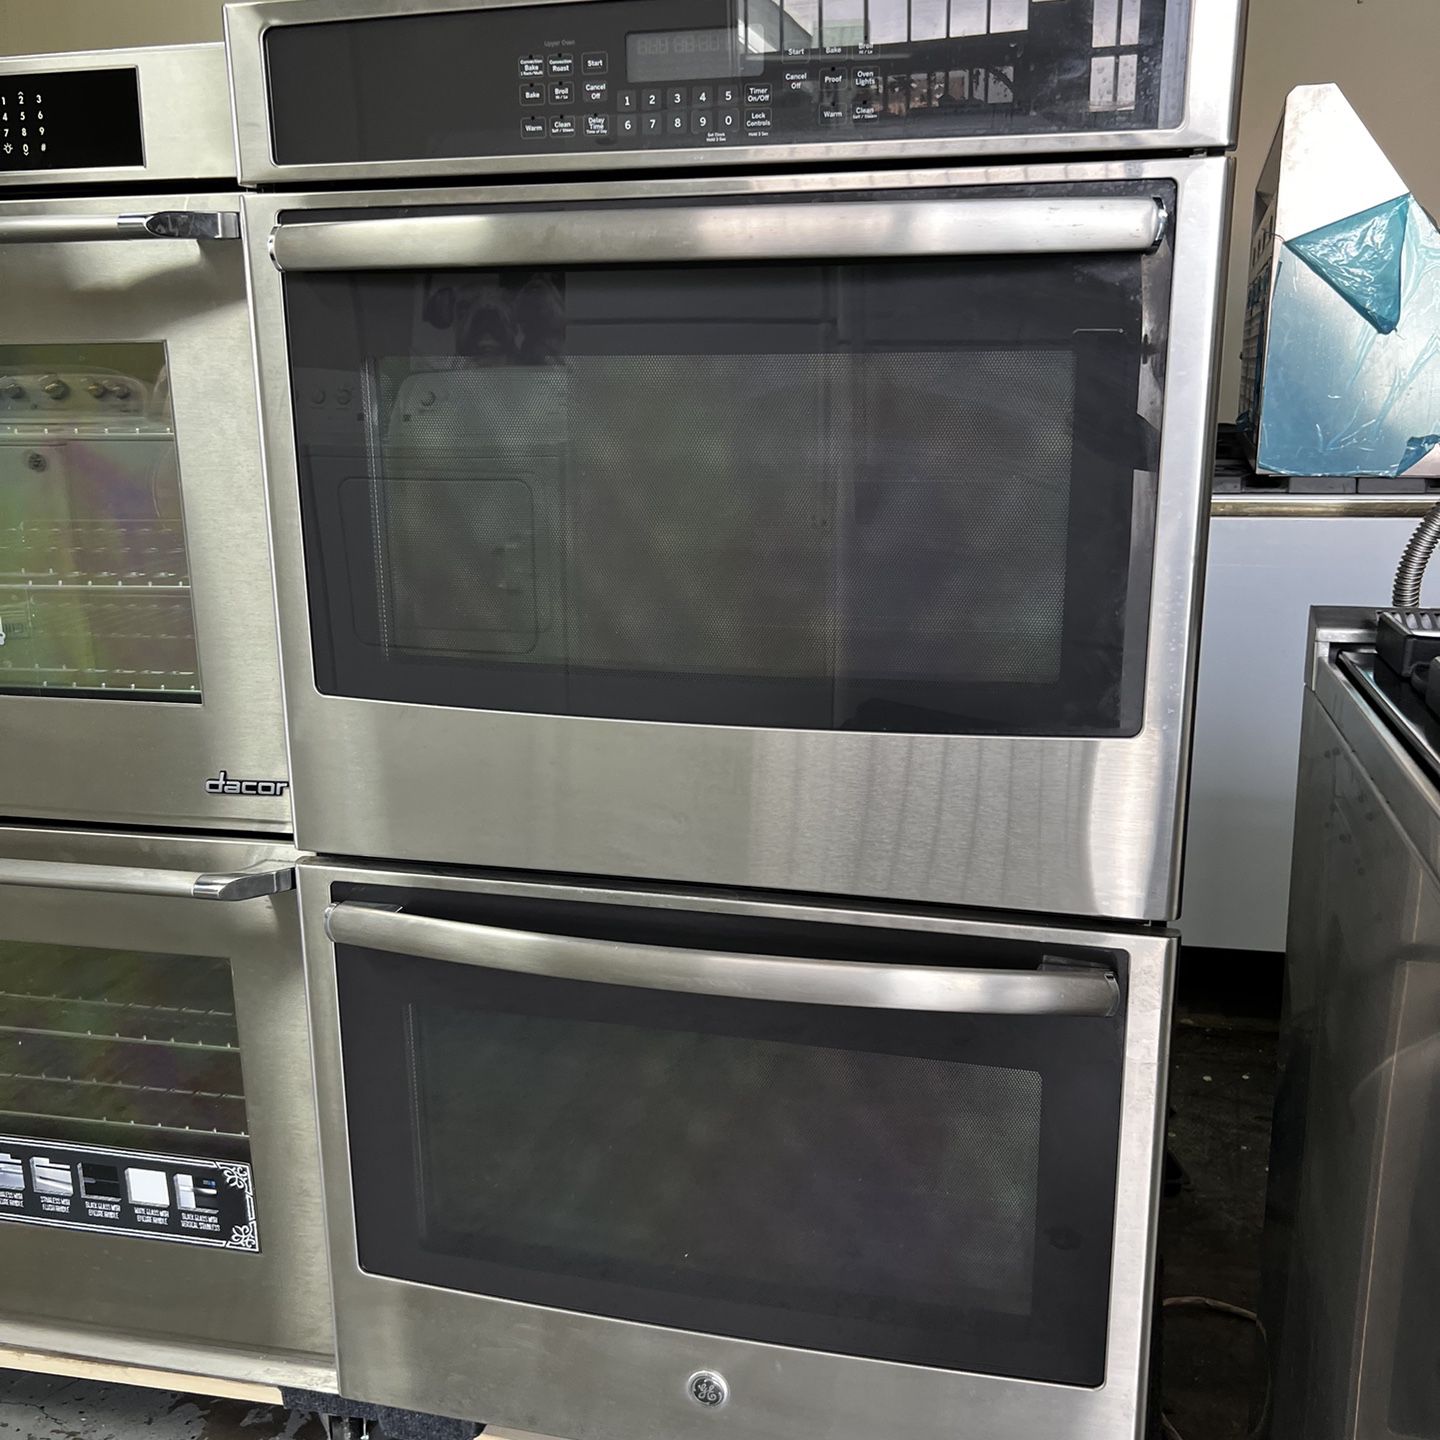 Ge 30”Wide Stainless Steel Double Electric Wall Oven 